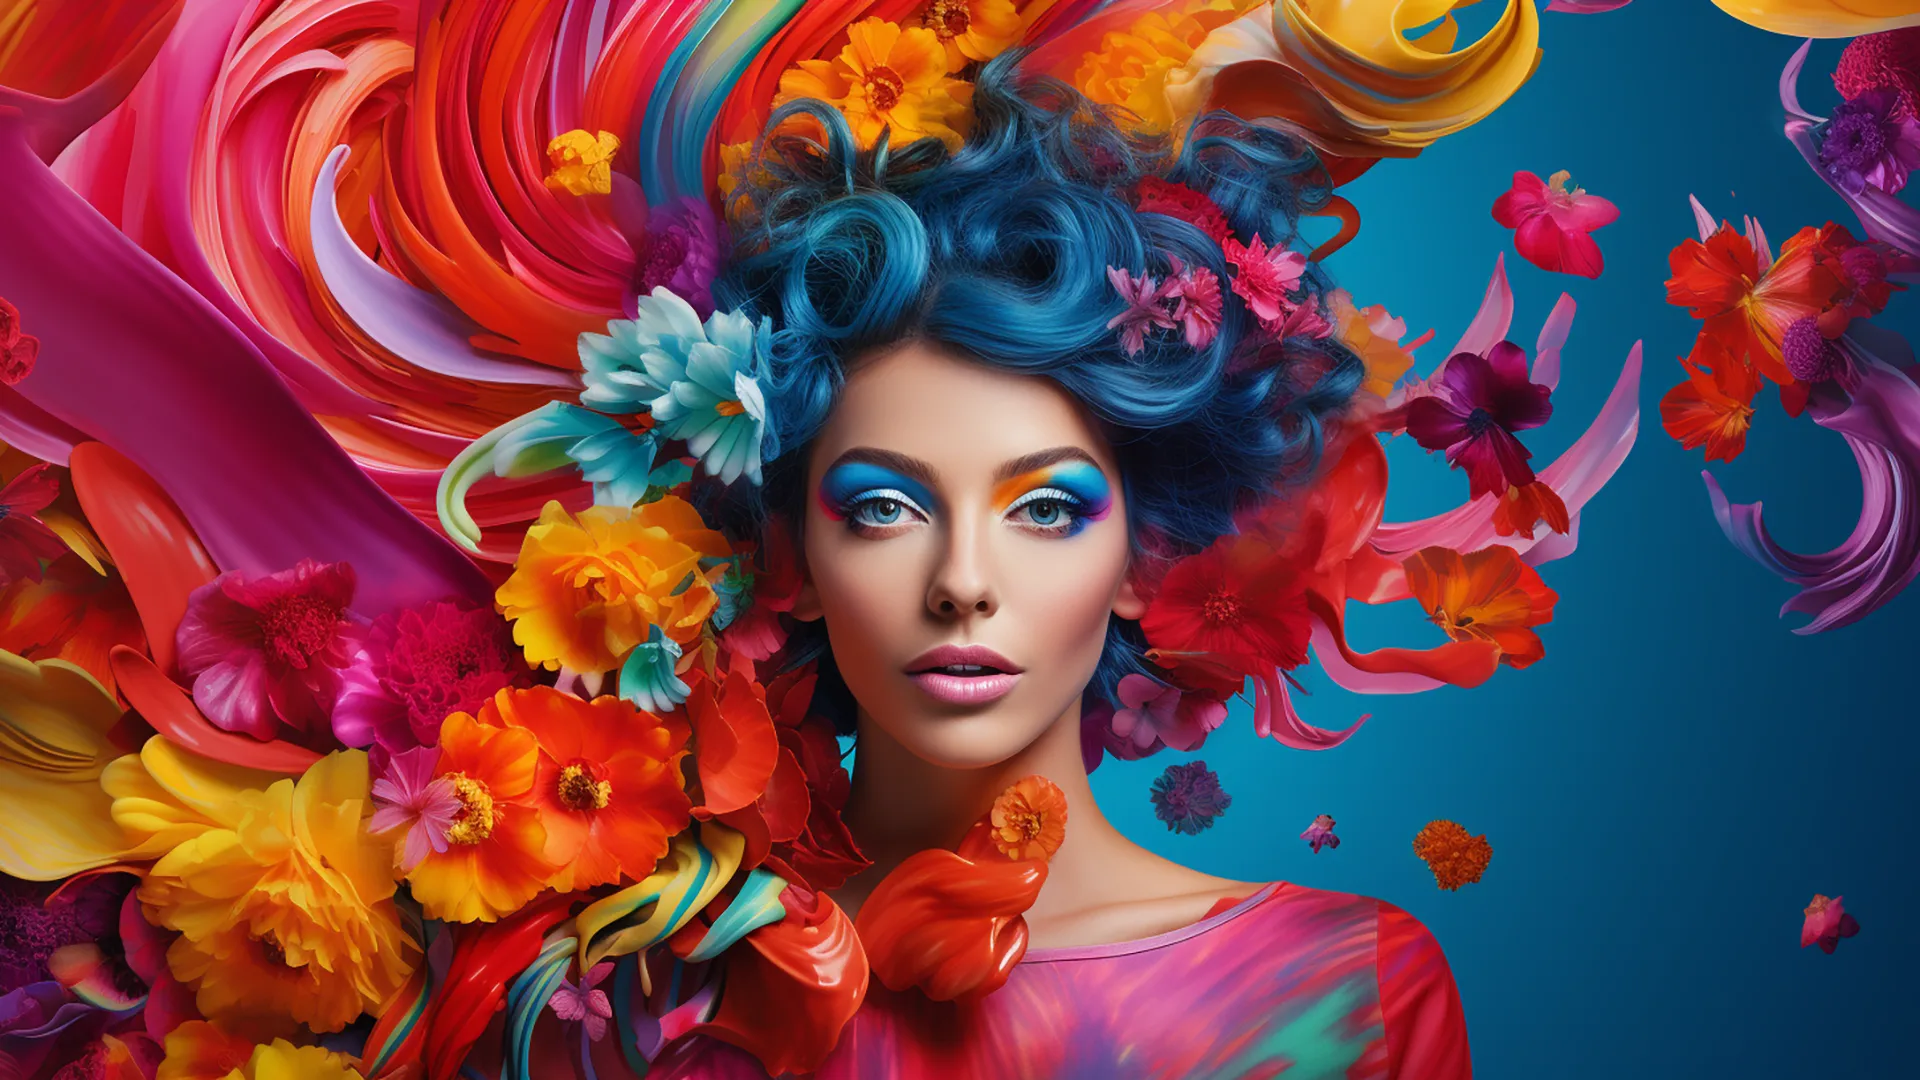 Vibrant, colourful photo of a beautiful blue haired female with rainbow make-up. Colourful flowers and swirls on a blue background - Montus - Services - Photography - Image #01